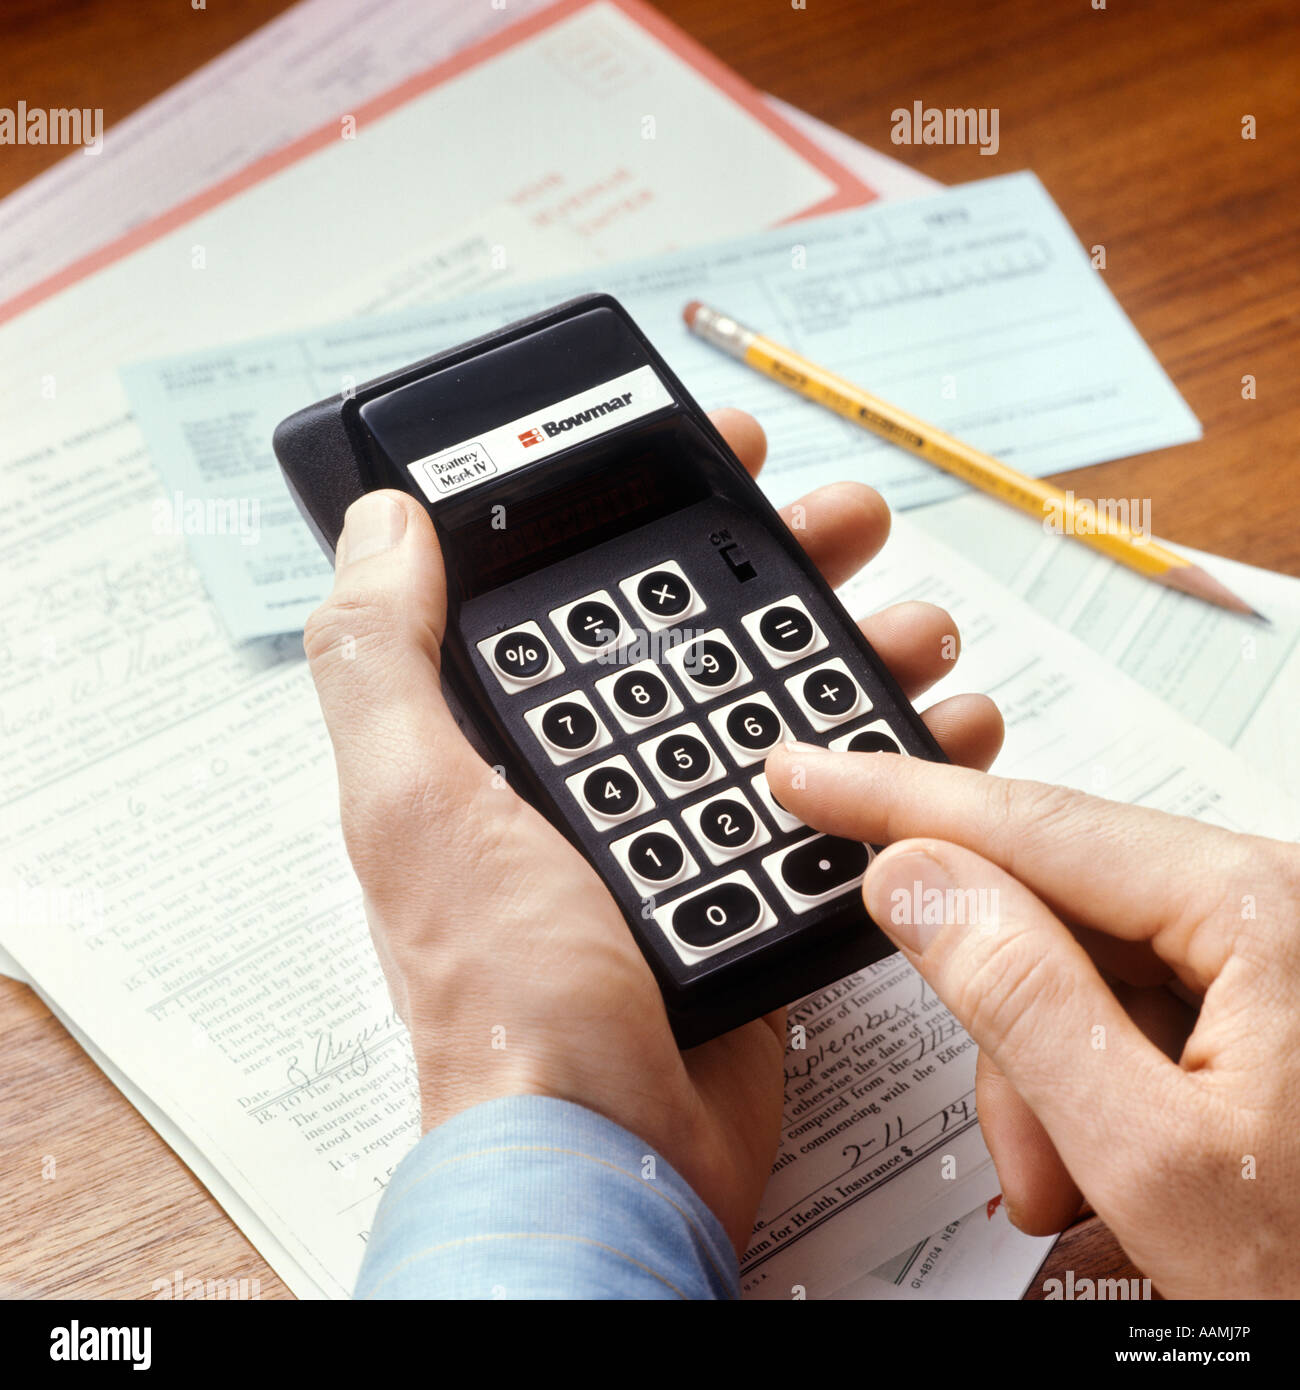 1970s DETAIL OF HANDS HOLD CALCULATOR NUMBERS INDEX FINGER ABOUT TO PUSH BACKGROUND OF BILLS PAPERS ON TABLE Stock Photo